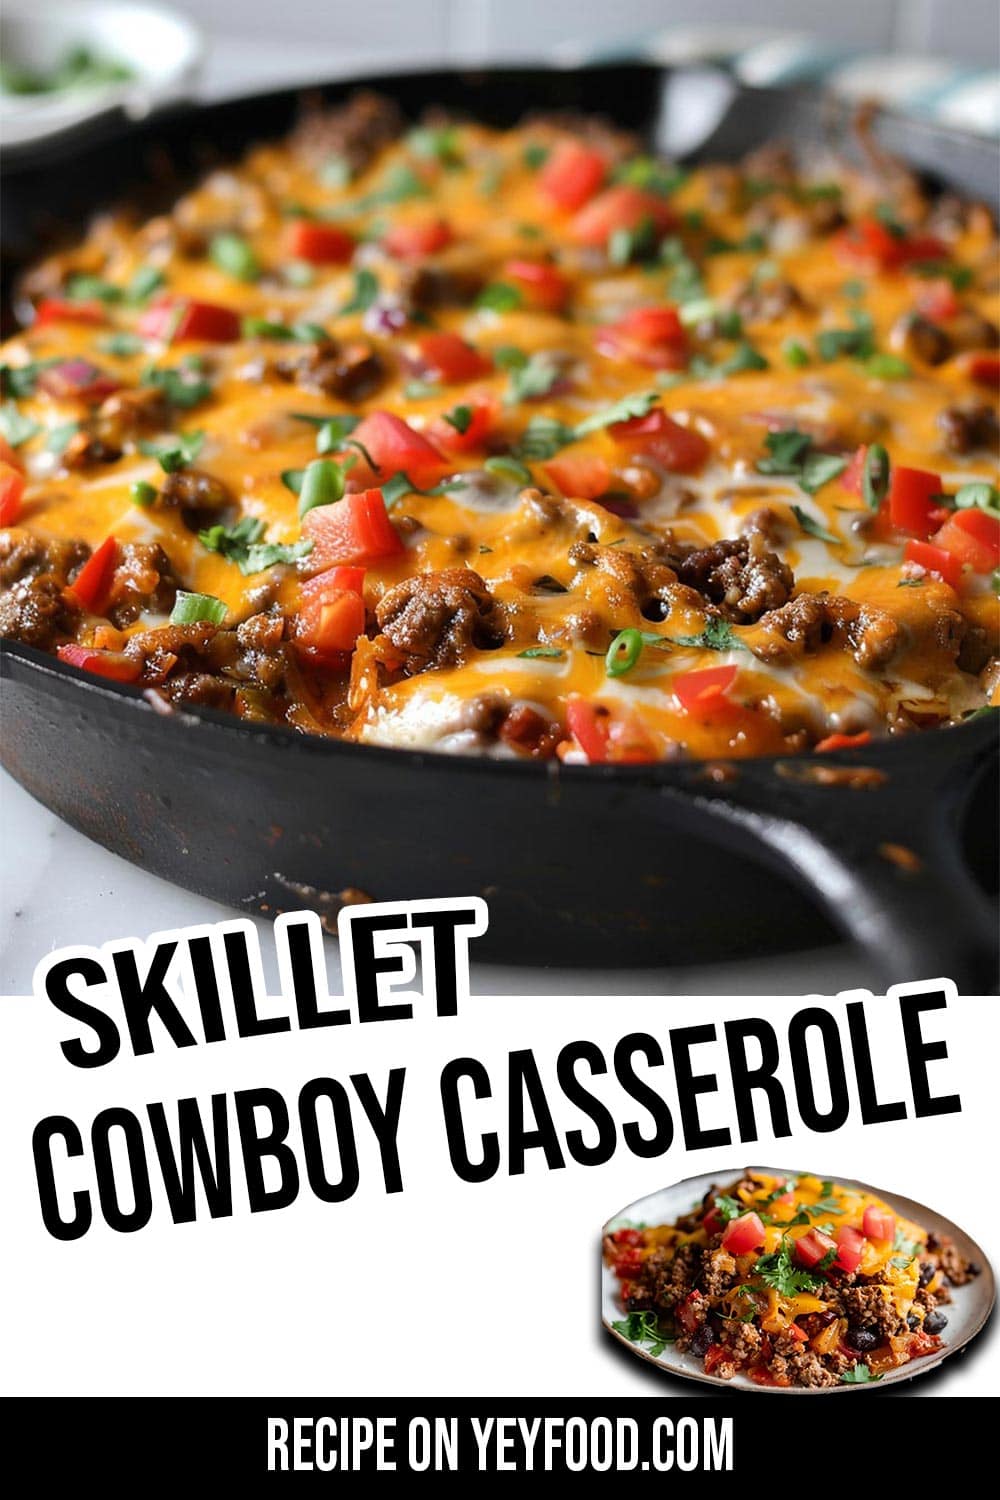 A skillet cowboy casserole with melted cheese, ground beef, beans, and diced vegetables, presented in a cast iron skillet. Perfect for busy families meals. Text overlay with the recipe source has also been added across the bottom.